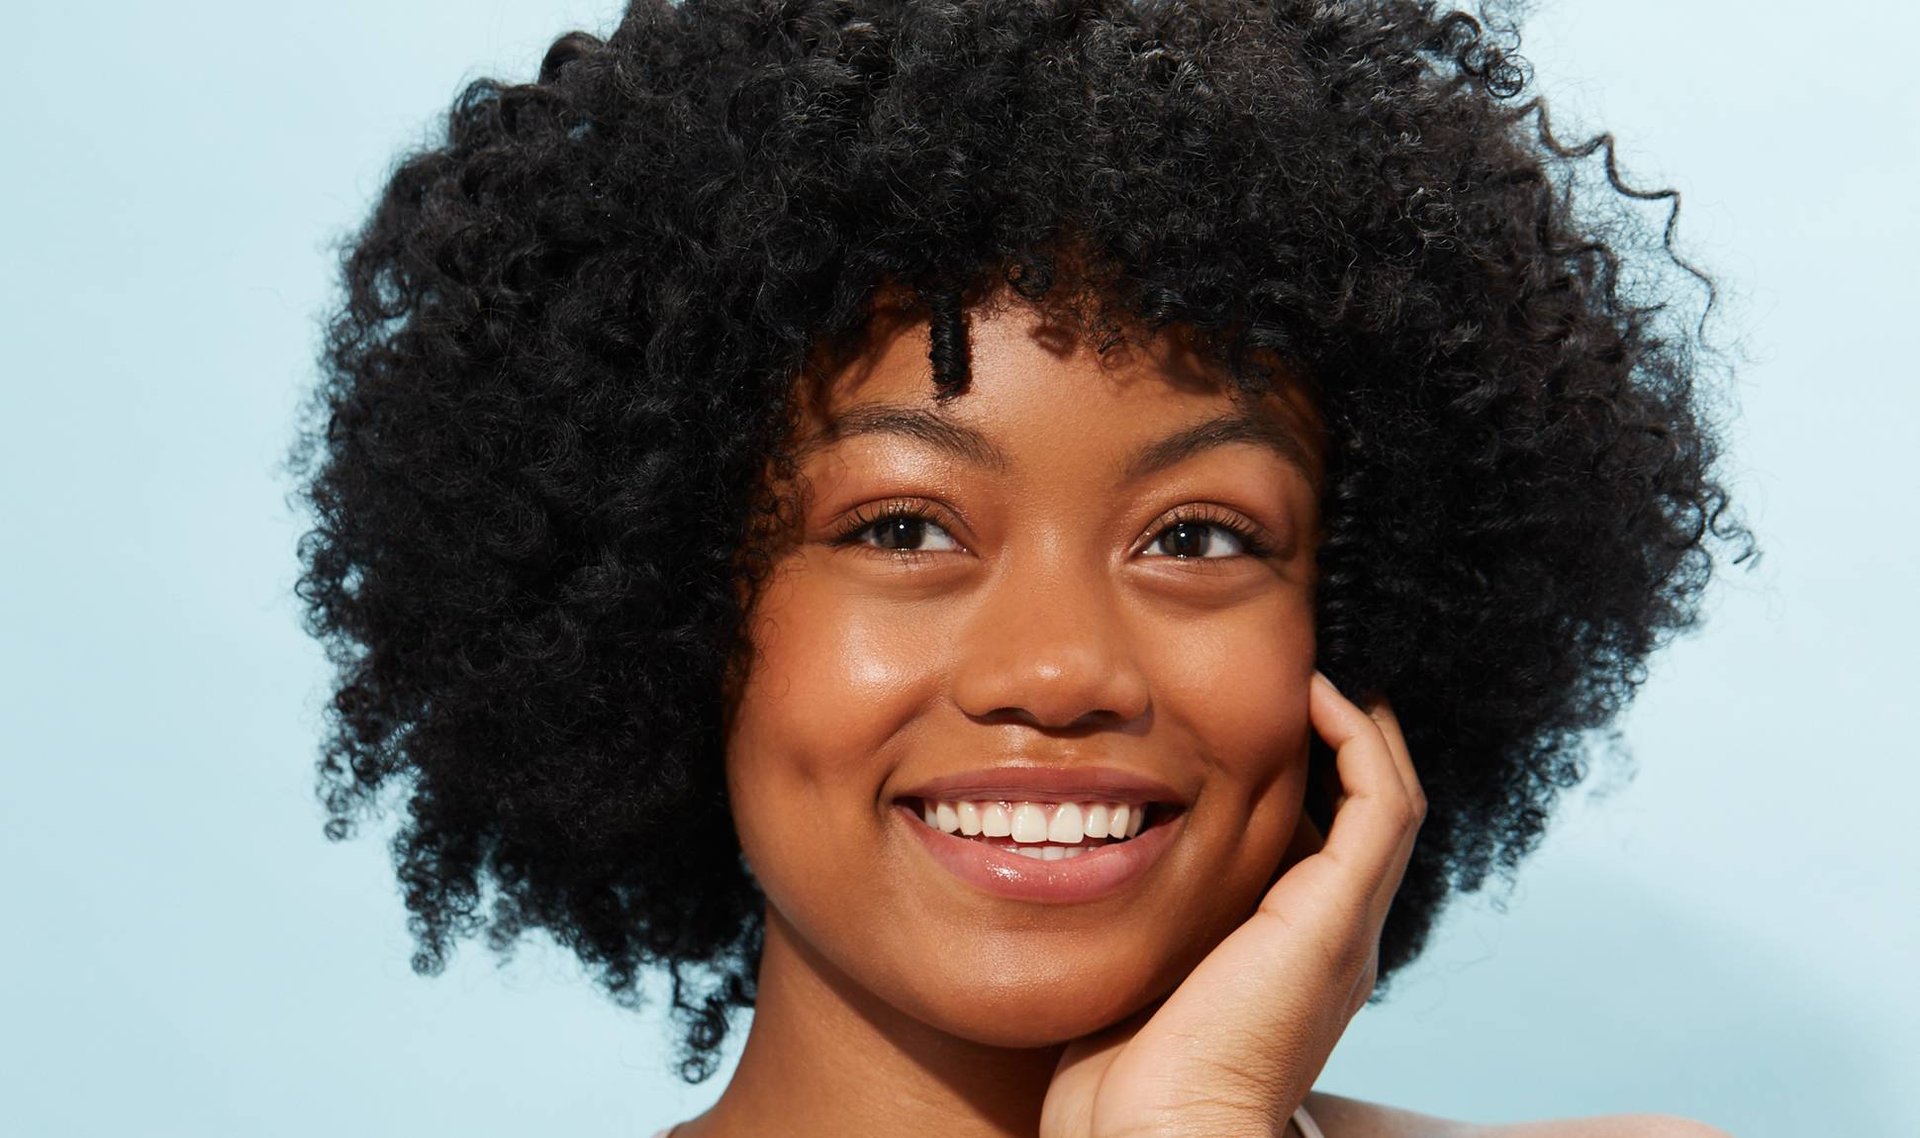 5 Tips for Improving Uneven Skin Texture, According to Dermatologists